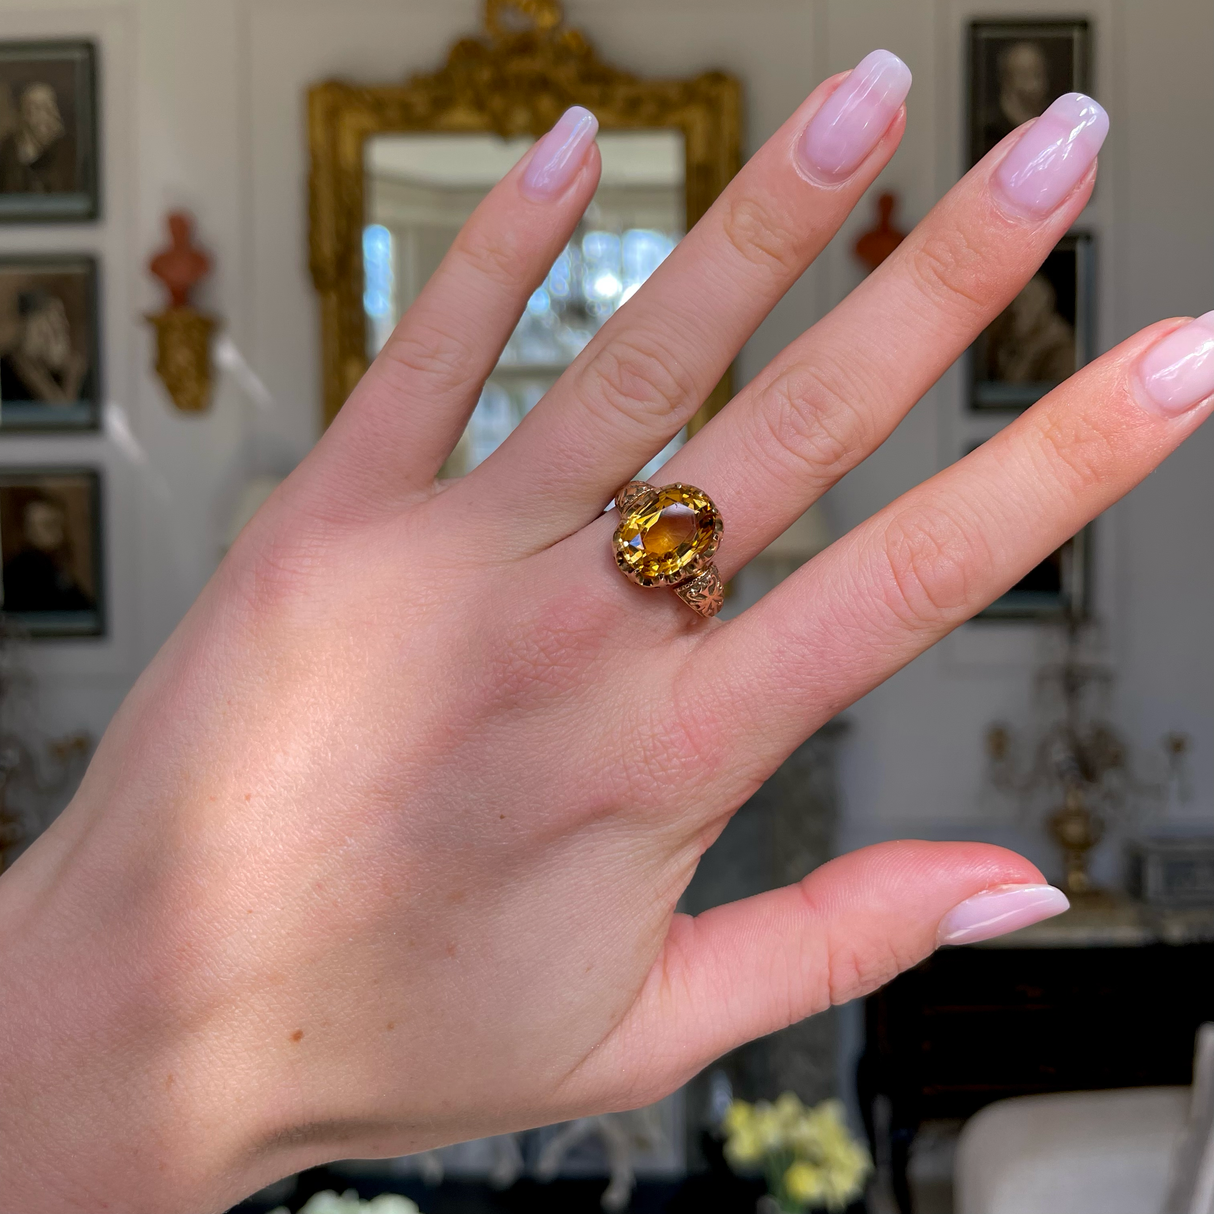 Imperial topaz single stone ring, worn on hand.